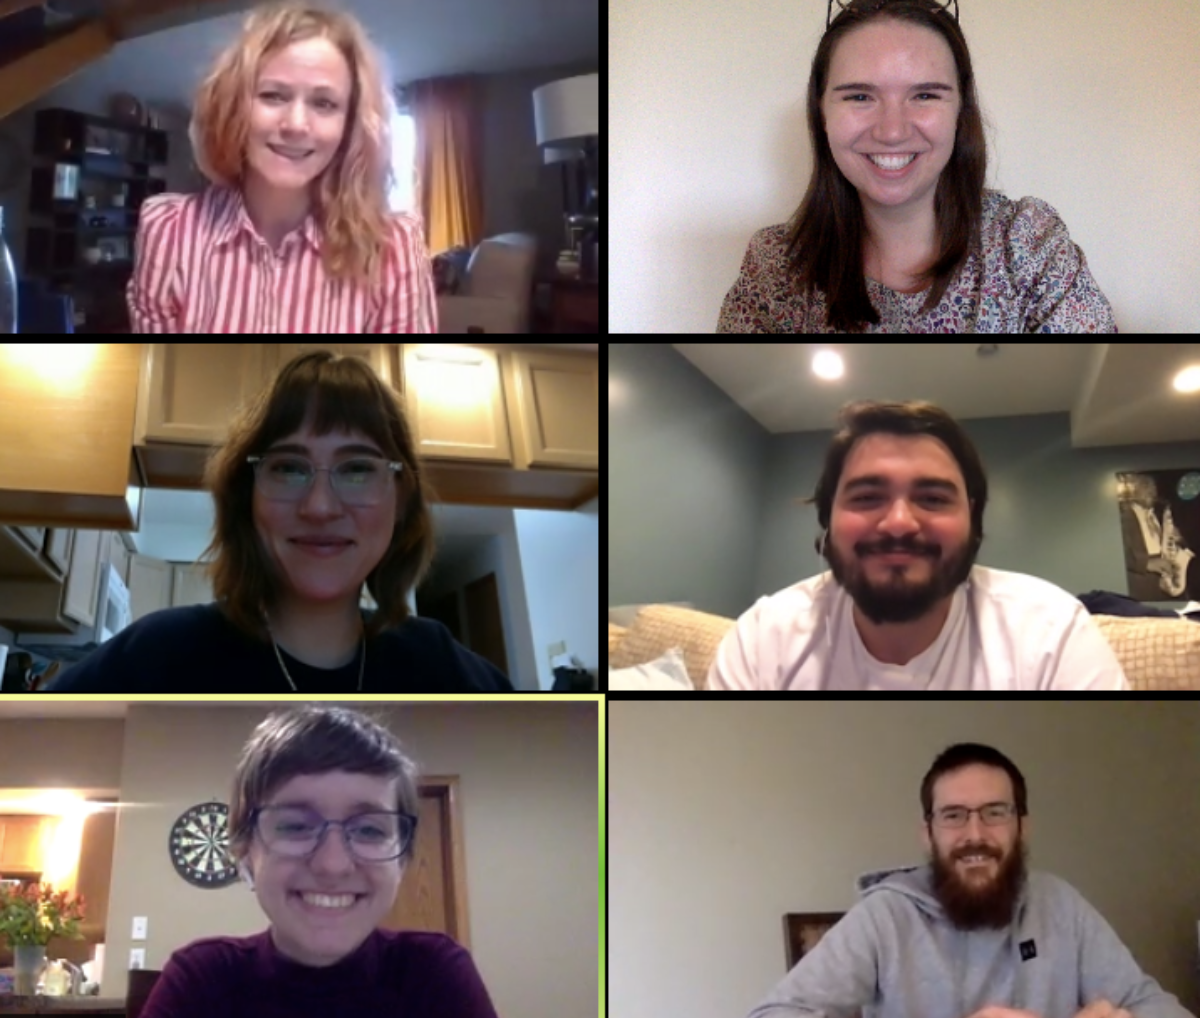 A screenshot from a Zoom call shows six rectangular boxes in a 2x3 grid pattern where each of the six law clerks are pictured from the chest up. They are smiling at the camera.